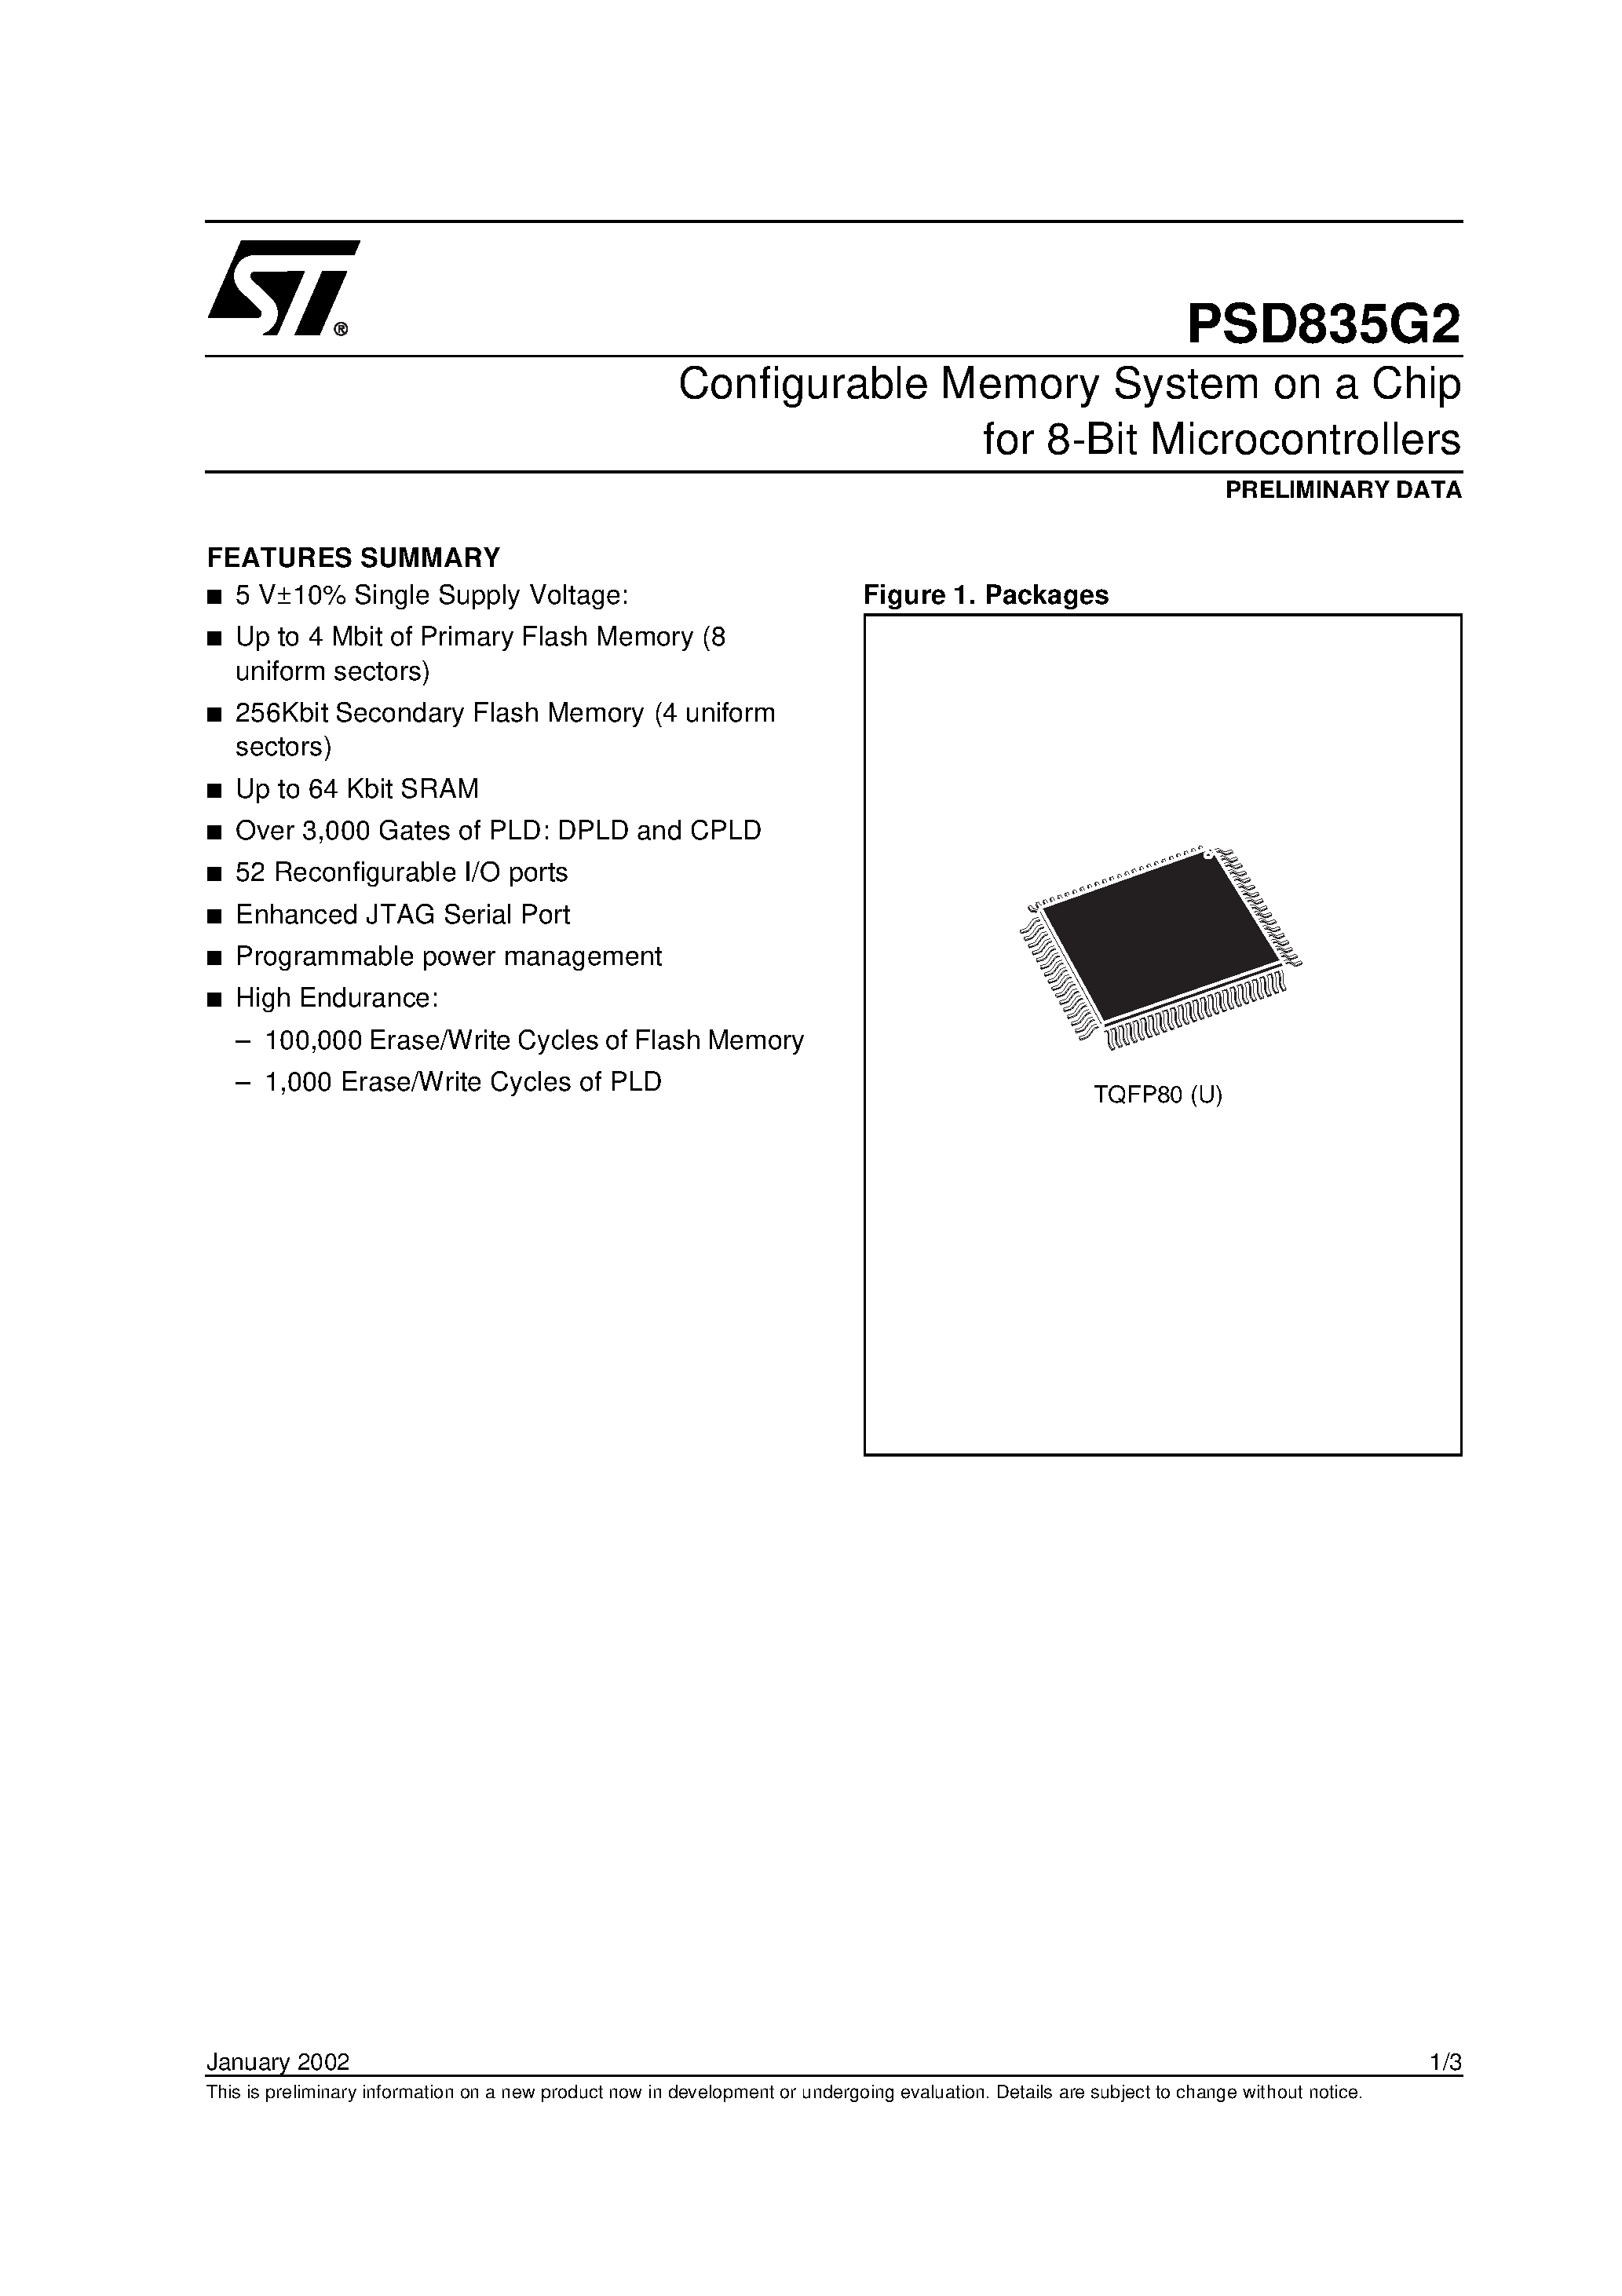 Datasheet PSD835F2-A-20J - Configurable Memory System on a Chip for 8-Bit Microcontrollers page 1